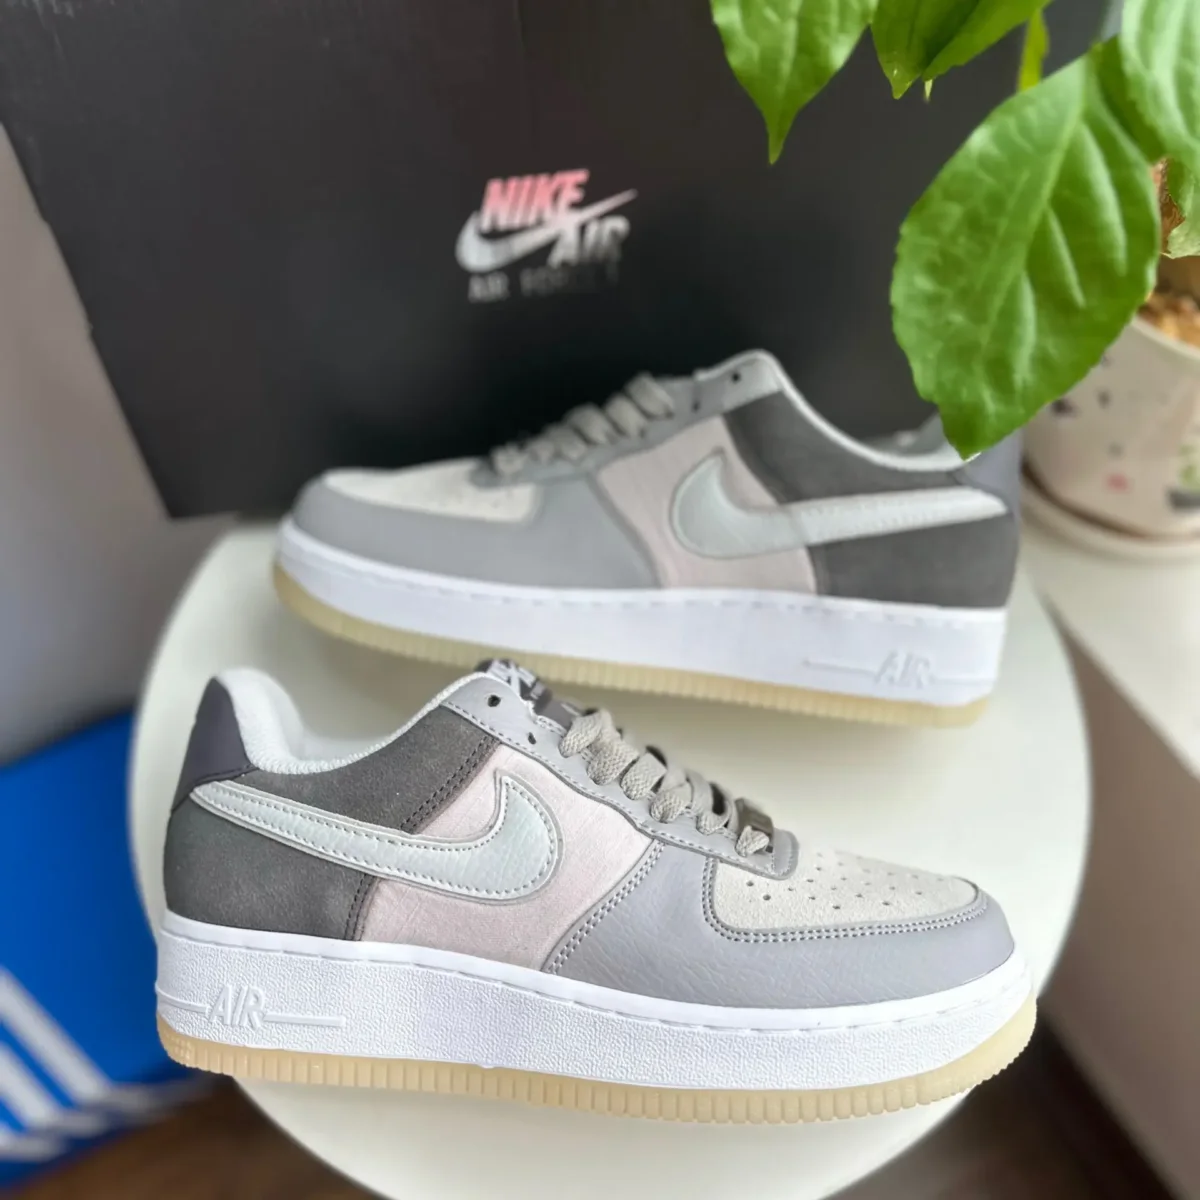 giày Nike Air Force 1 Low 07 LV8 2 Atmosphere Grey Thunder